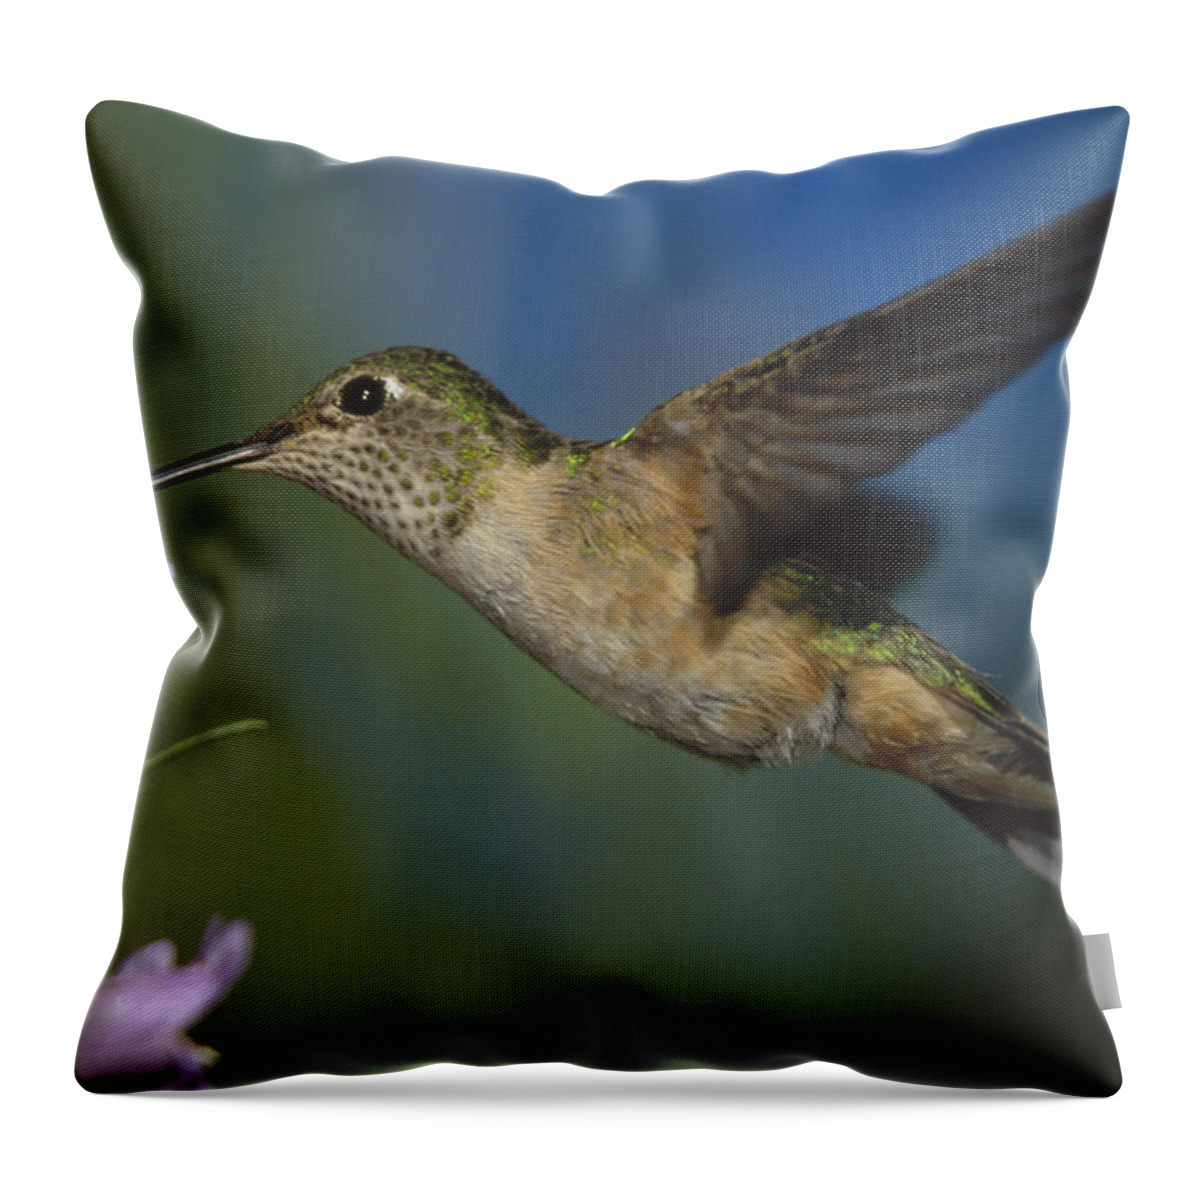 00170045 Throw Pillow featuring the photograph Broad Tailed Hummingbird Feeding #2 by Tim Fitzharris